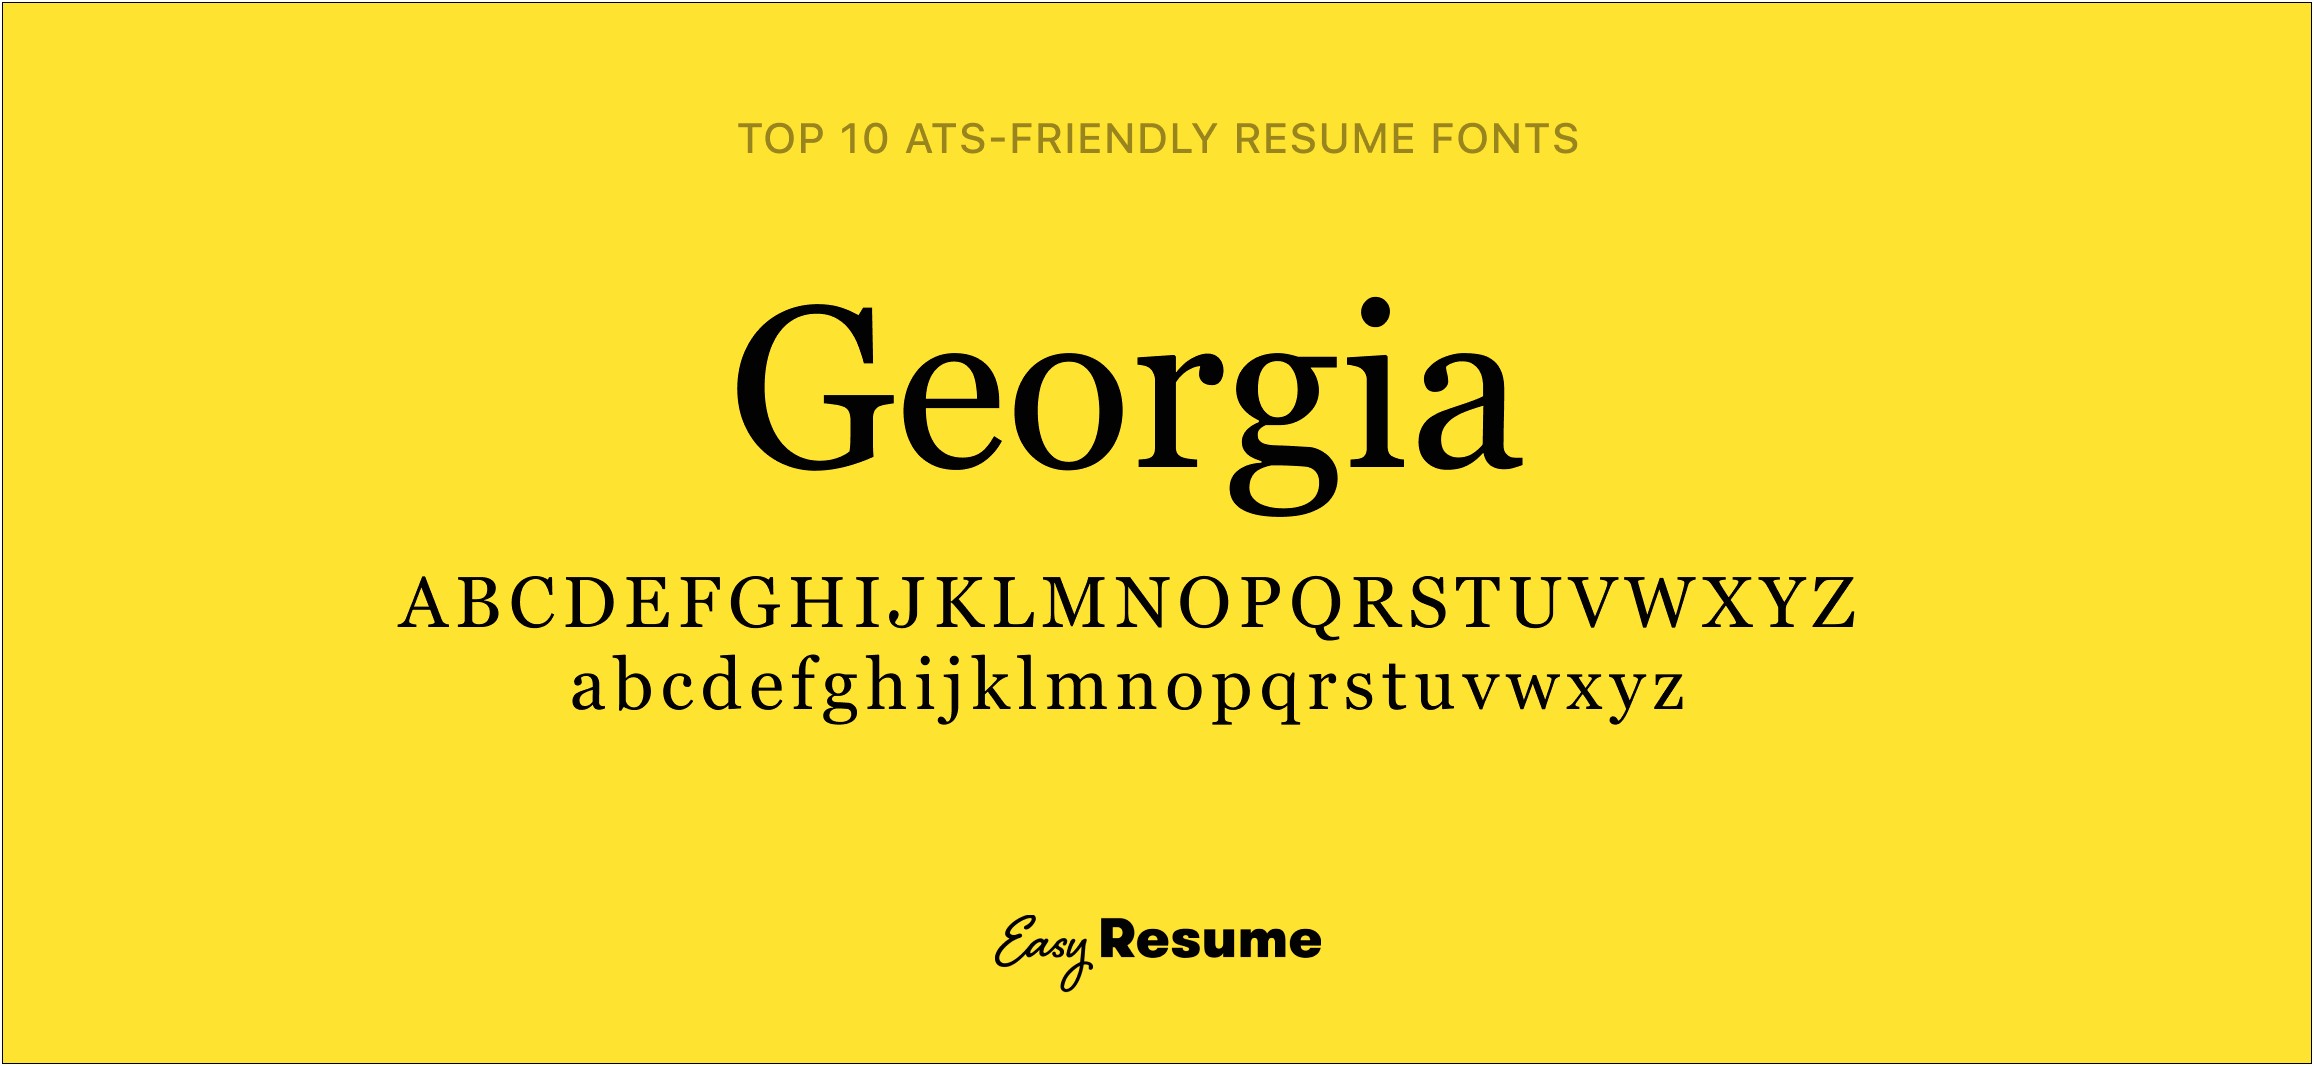 Best Fonts Used For Technical Resumes